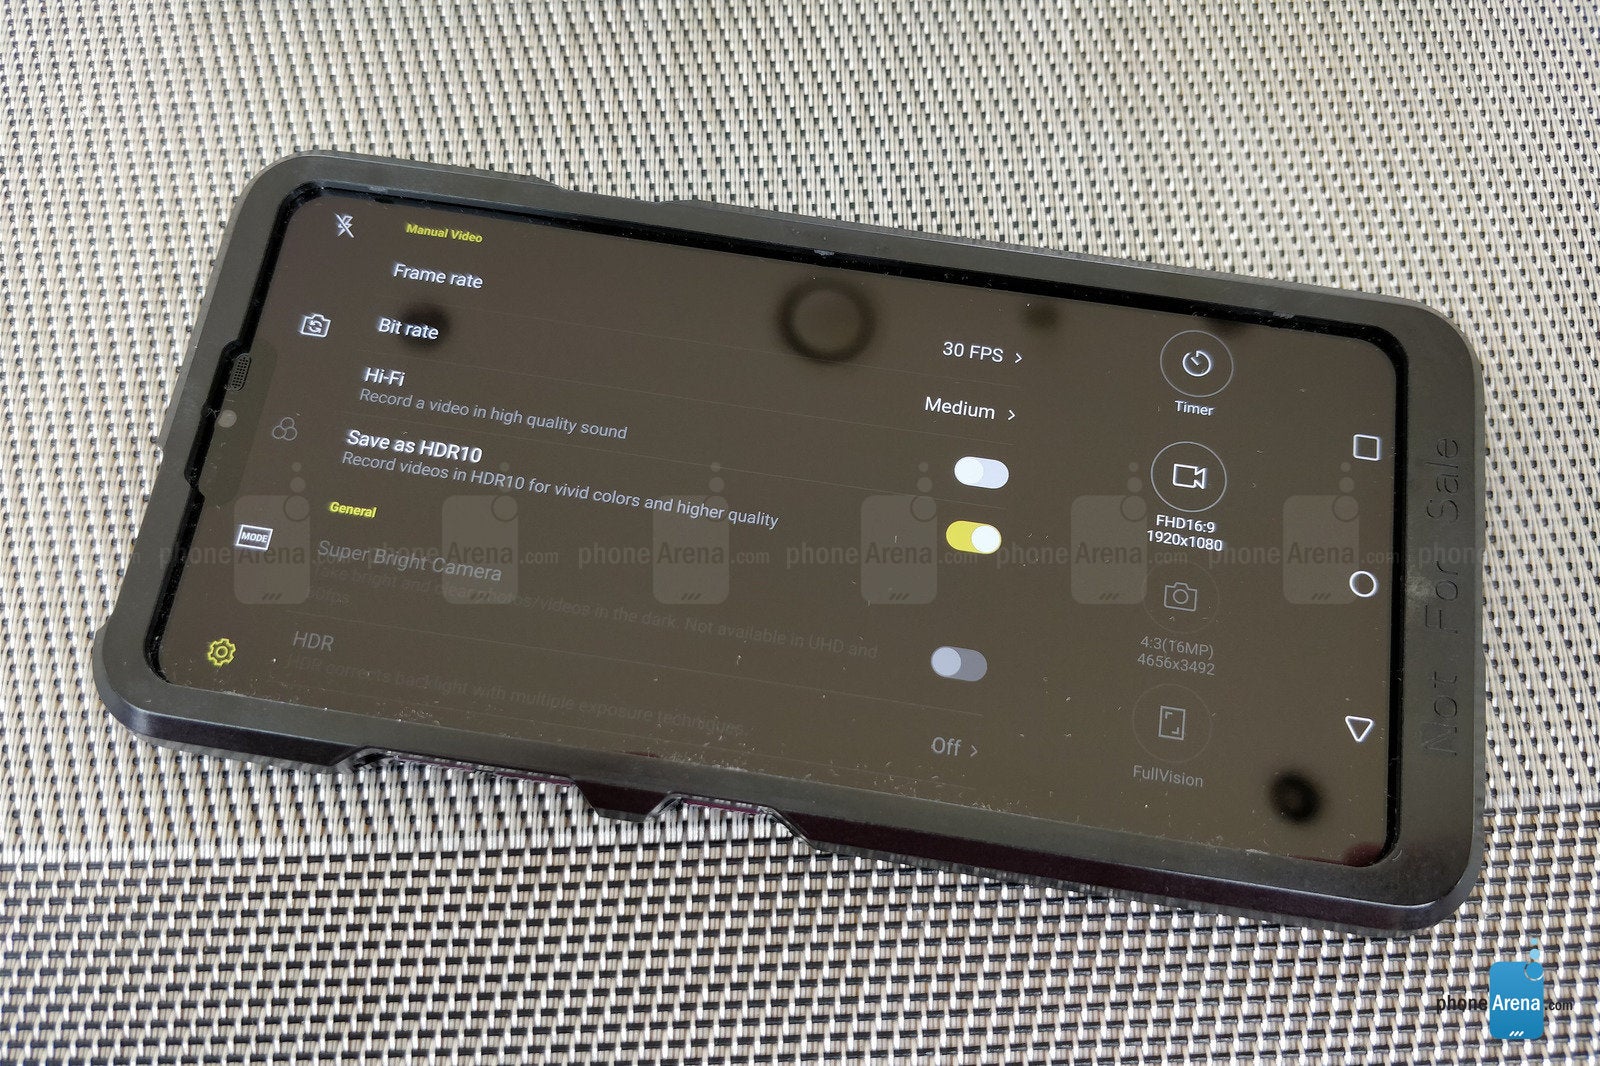 The HDR10 video mode is hidden in the camera's manual mode. (Pictured is an LG G7 inside a protective case) - The LG G7 ThinQ has a hidden HDR10 video recording mode